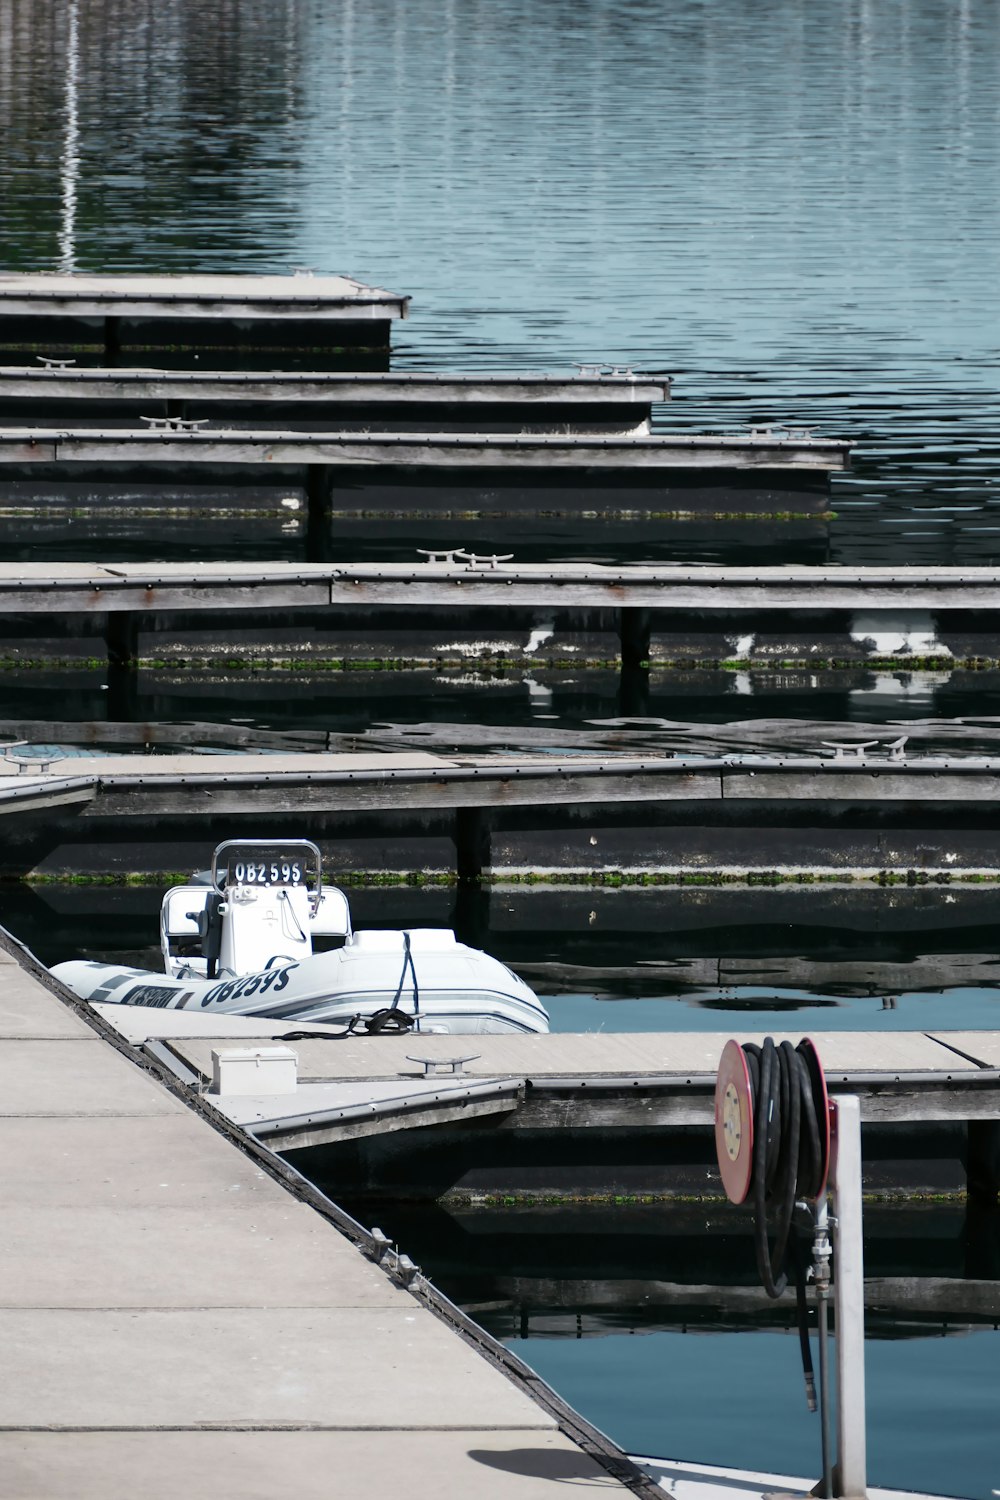 a small boat is docked at a dock